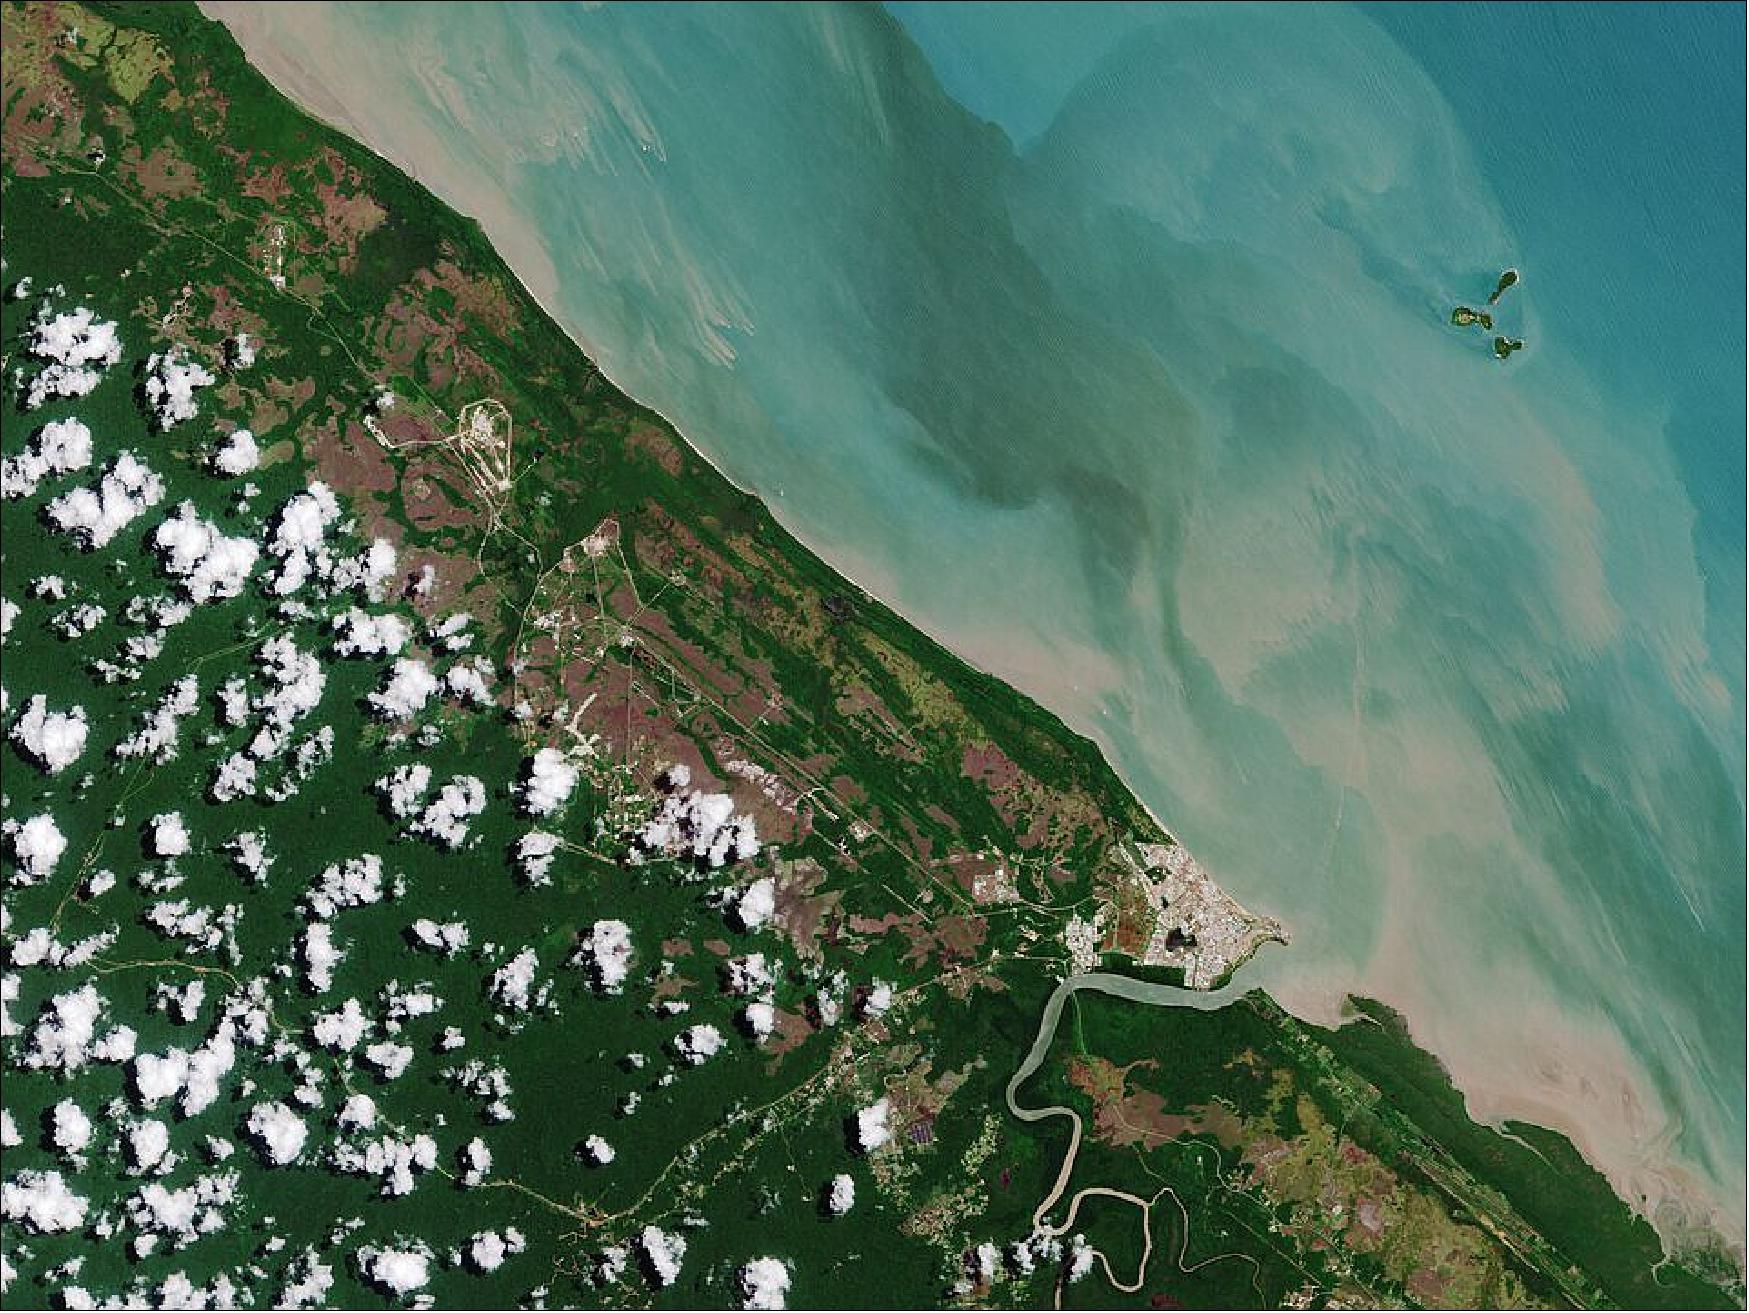 Figure 1: Located around 60 km northwest of the French Guyanese capital Cayenne, Kourou is a coastal town in the north-central part of the country and is visible in the lower right of the image. The town lies at the estuary of the Kourou River which, after its journey of 144 km, empties into the Atlantic Ocean. Its muddy waters appear brown most likely due to sediments picked up from the surrounding forest. This image is also featured on the Earth from Space video program (image credit: ESA)